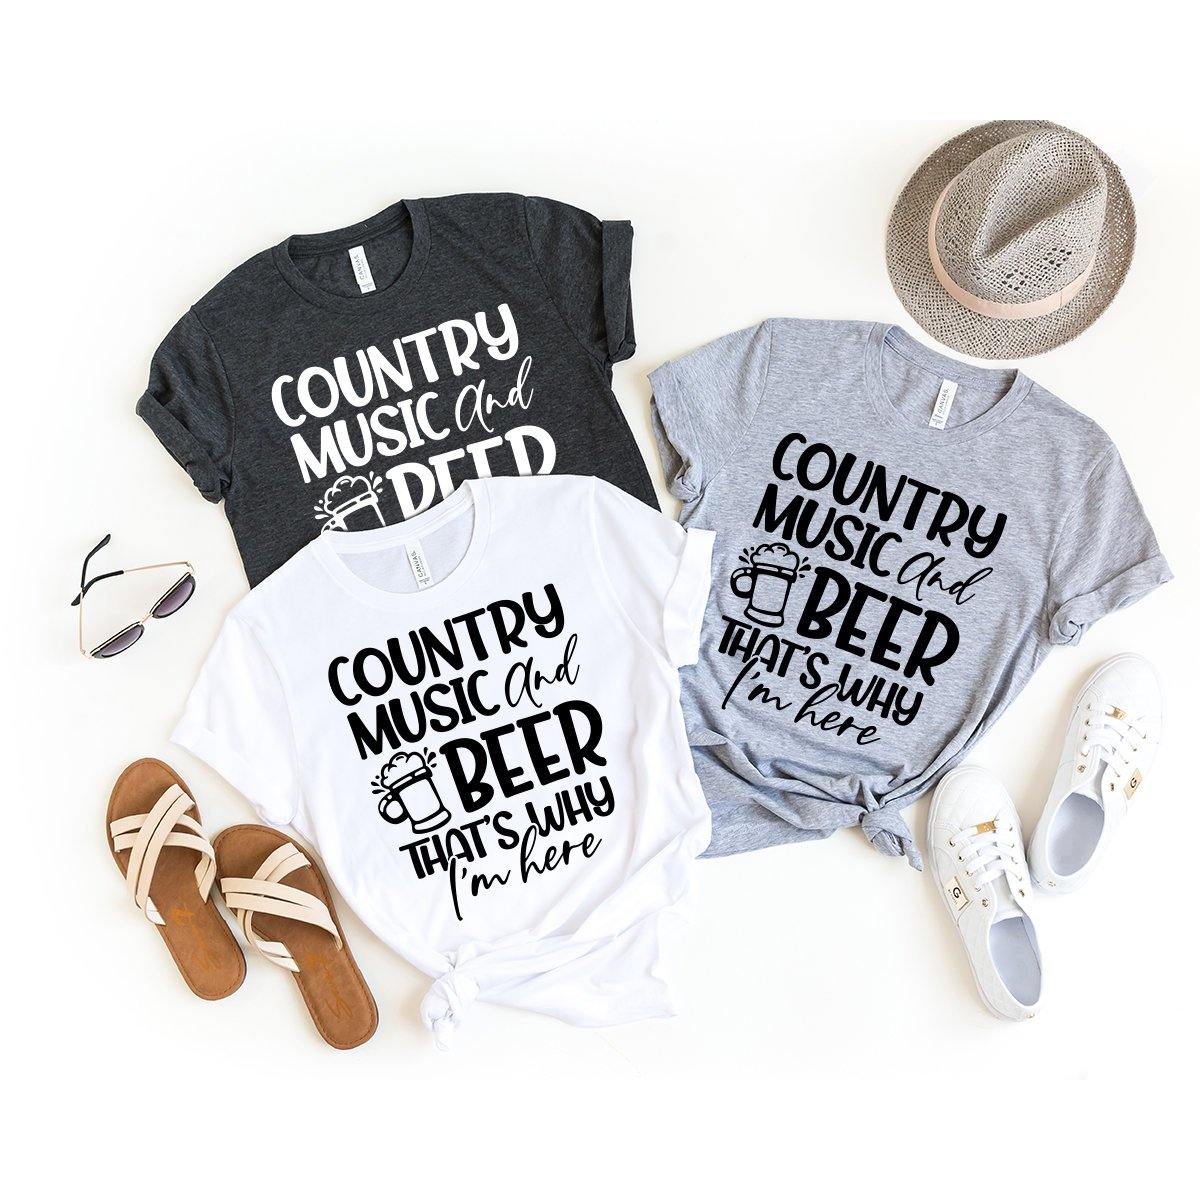 Country Music Festival Shirt, Country Music And Beer That's Why I Am Hear Shirt, Country Girl Shirt, Country Women Shirt, Southern Life Tee - Fastdeliverytees.com